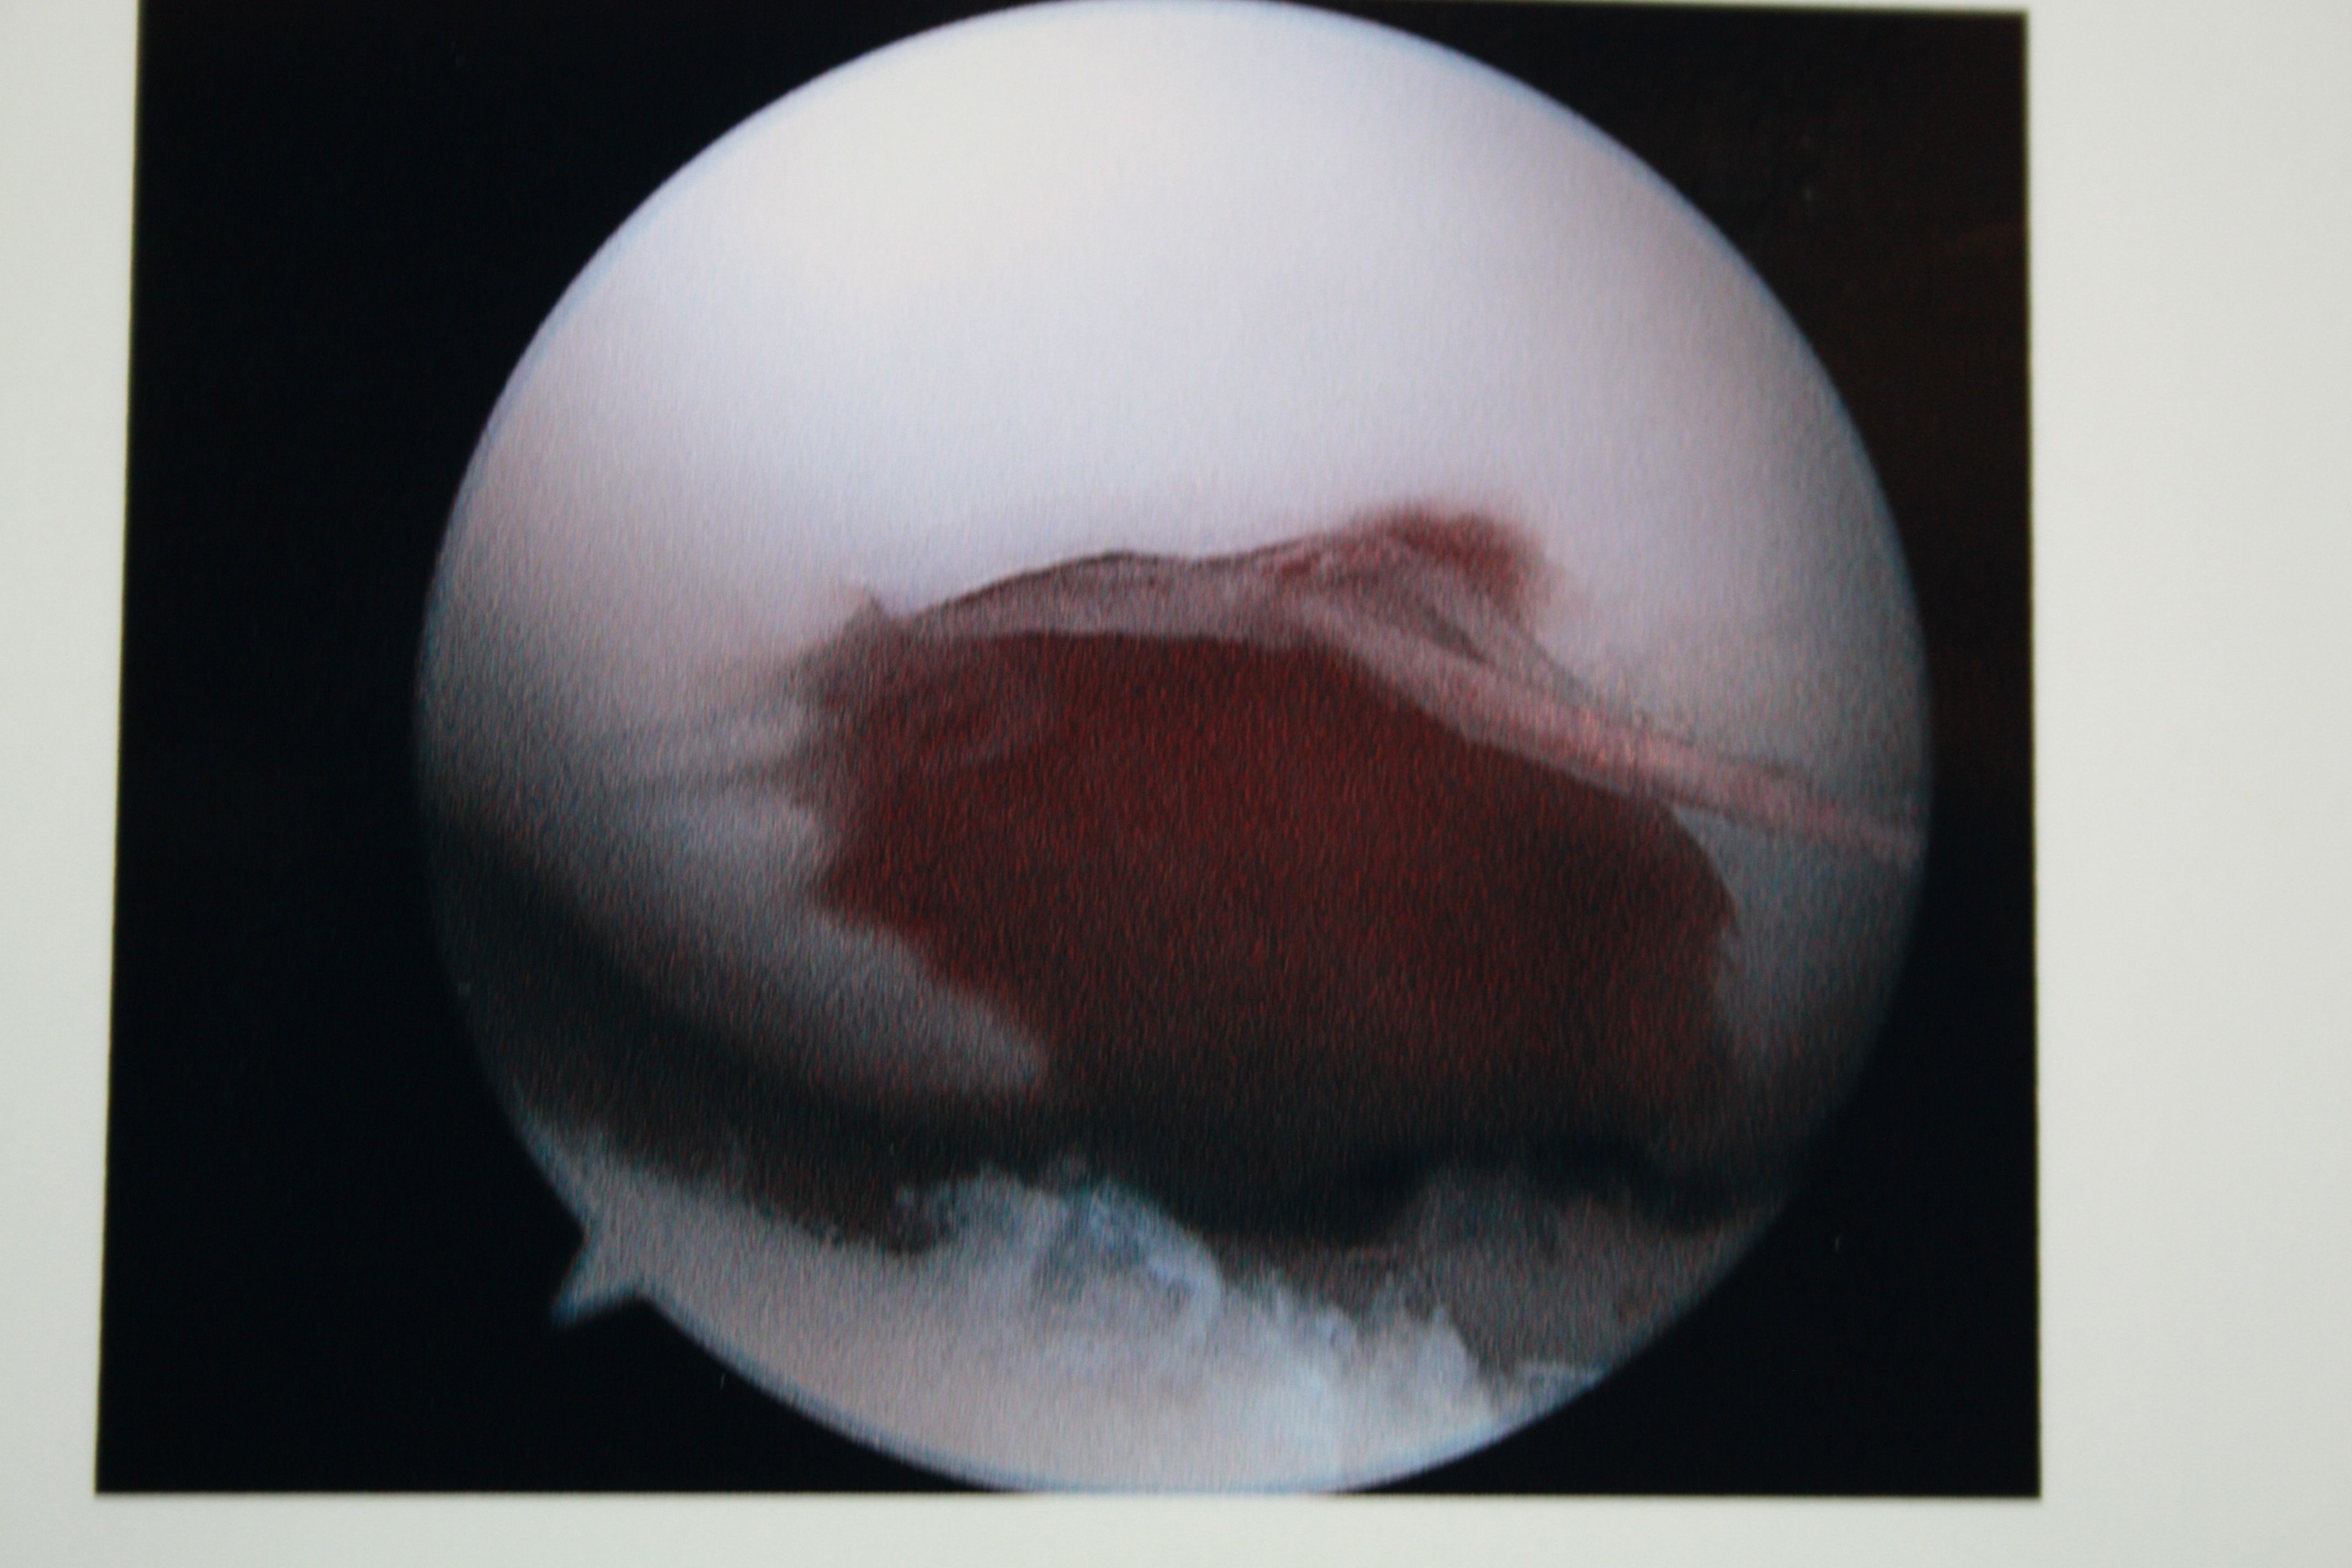 14 year old girl with acute injury to articular cartilage.